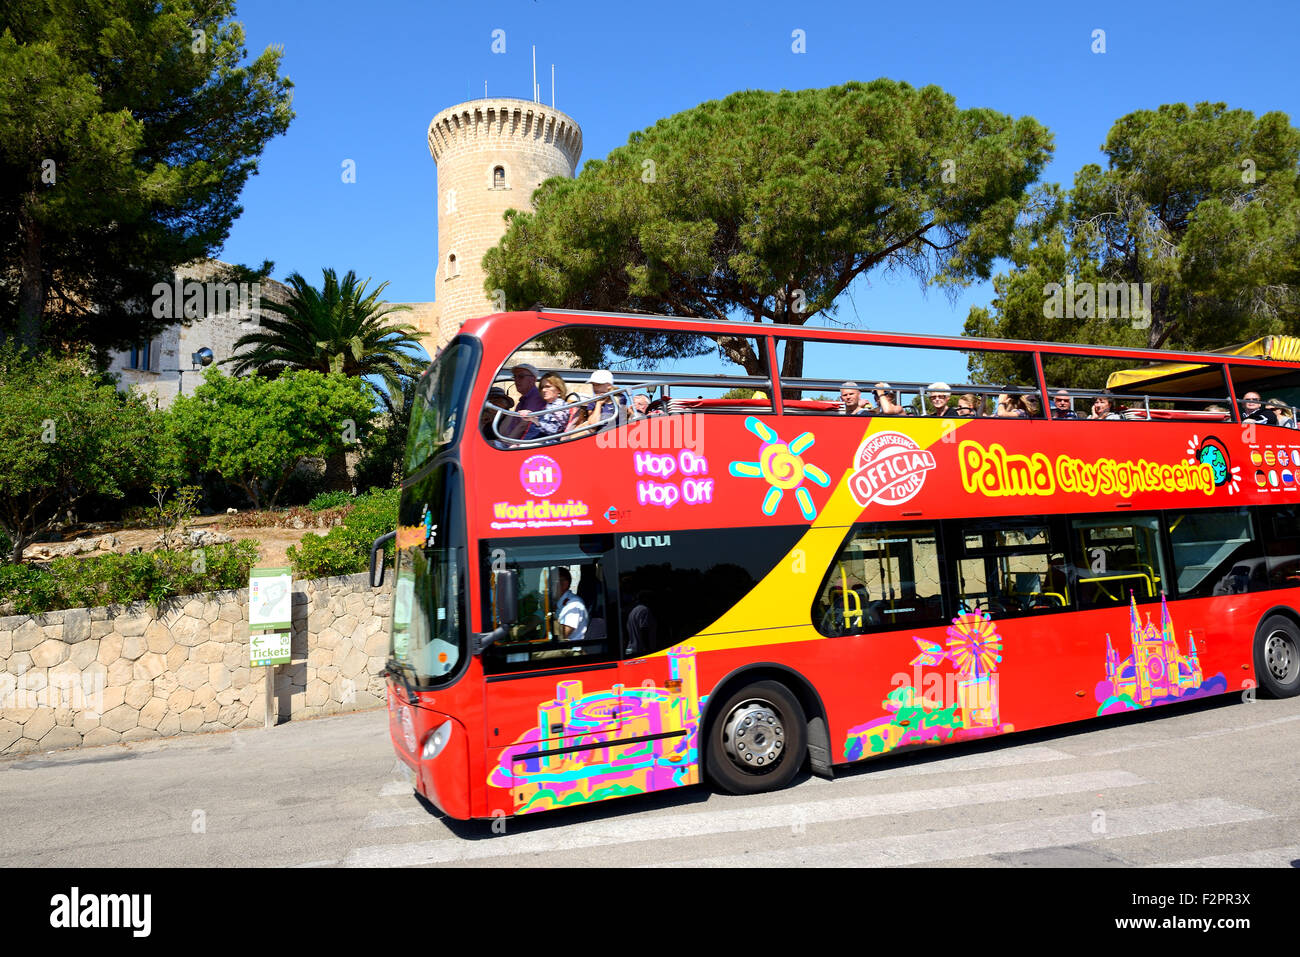 The tourists enjoying their vacation on the city sight seeing bus, Mallorca, Spain. Stock Photo